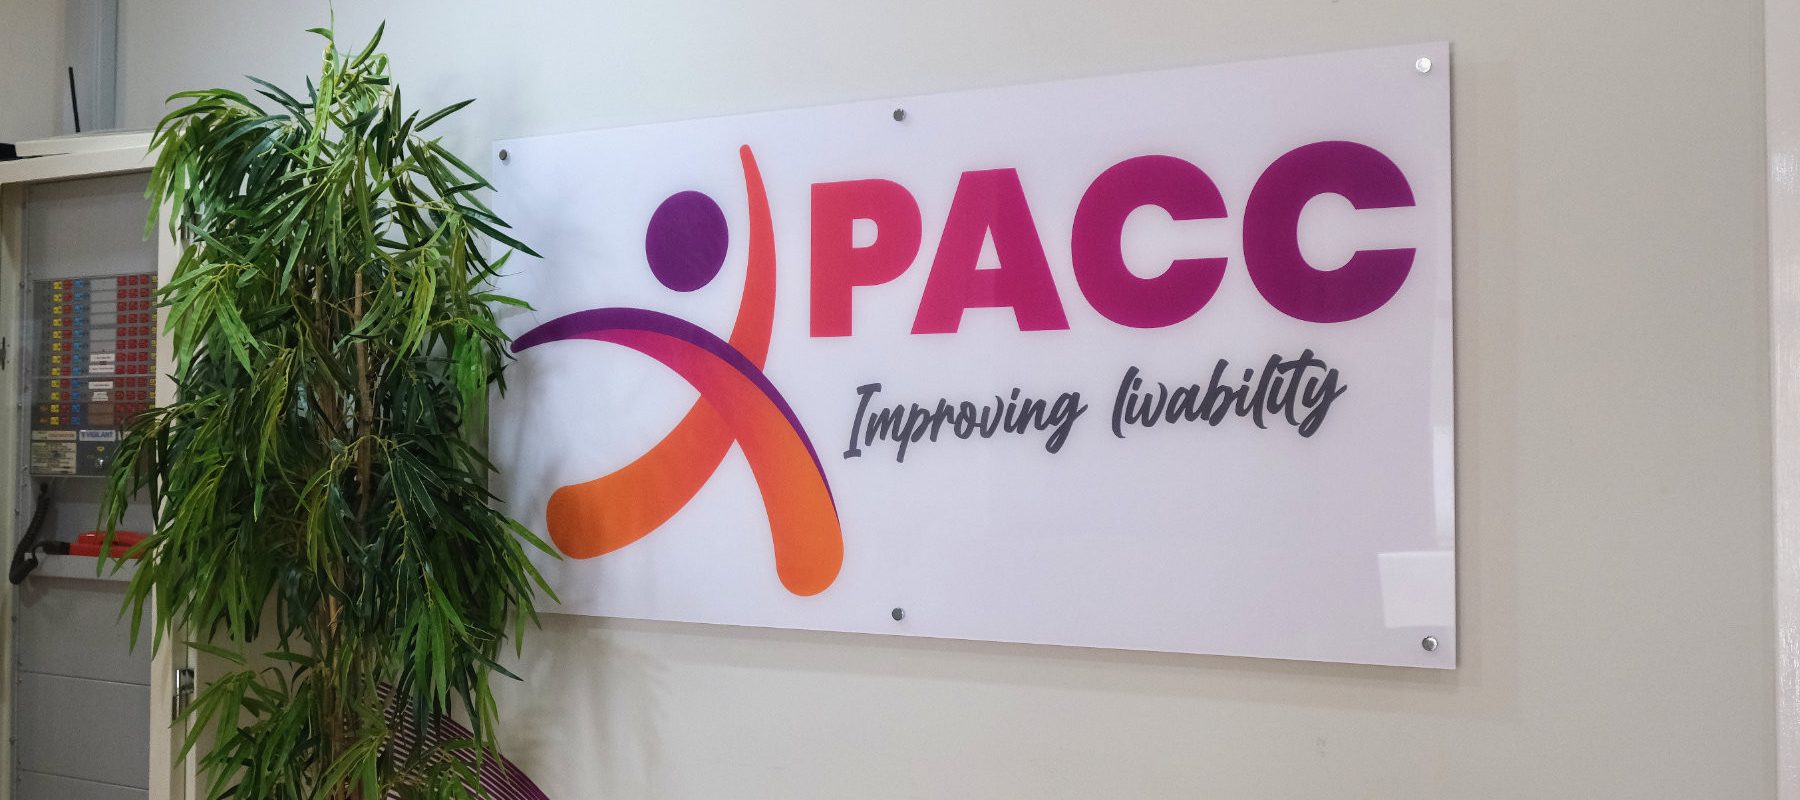 Disability agency Adelaide - PACC - reception